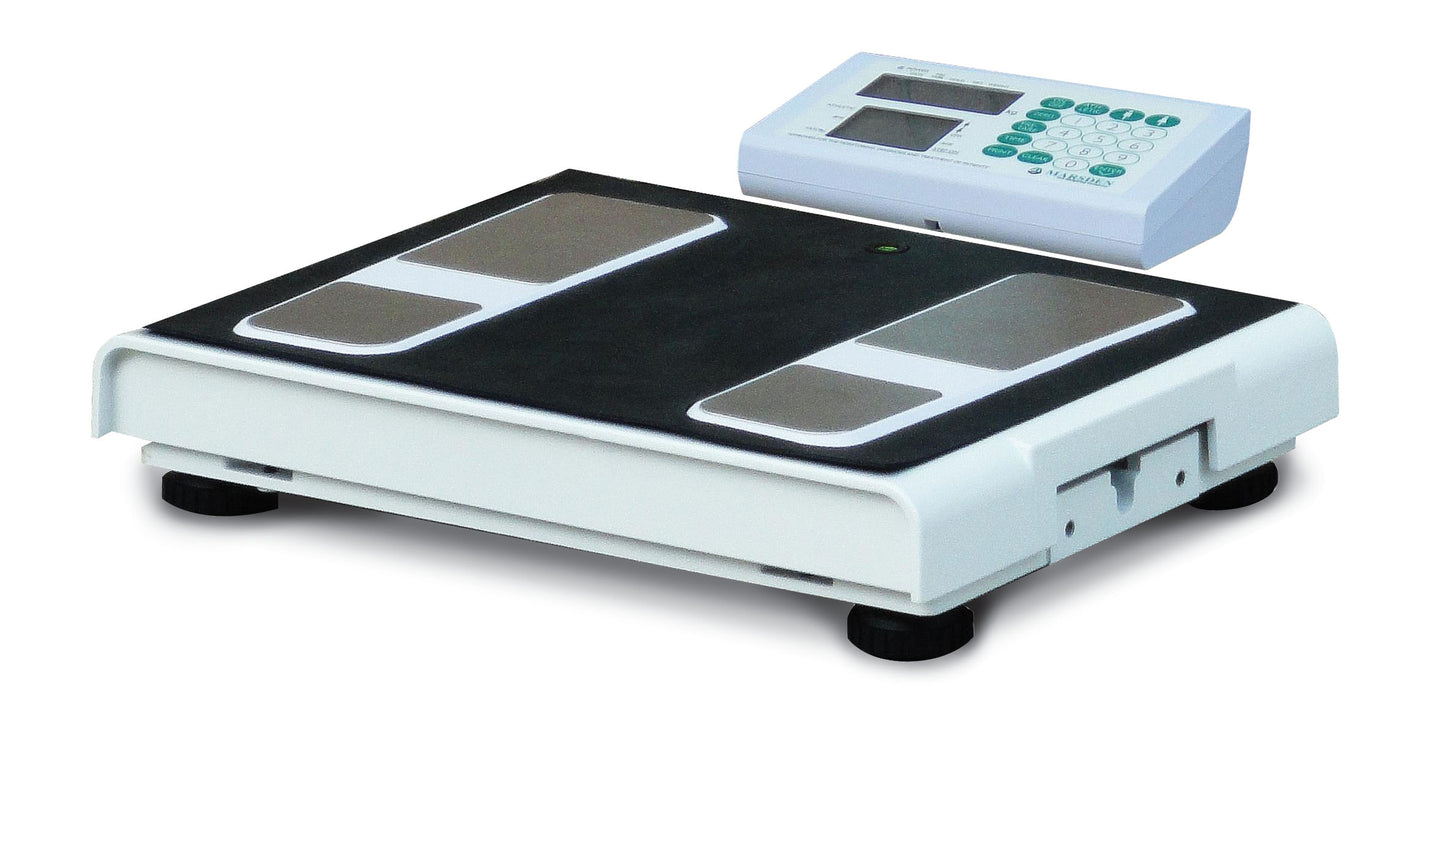 Marsden - Body Composition / Body Fat Analysing Scale with Printer - Approved